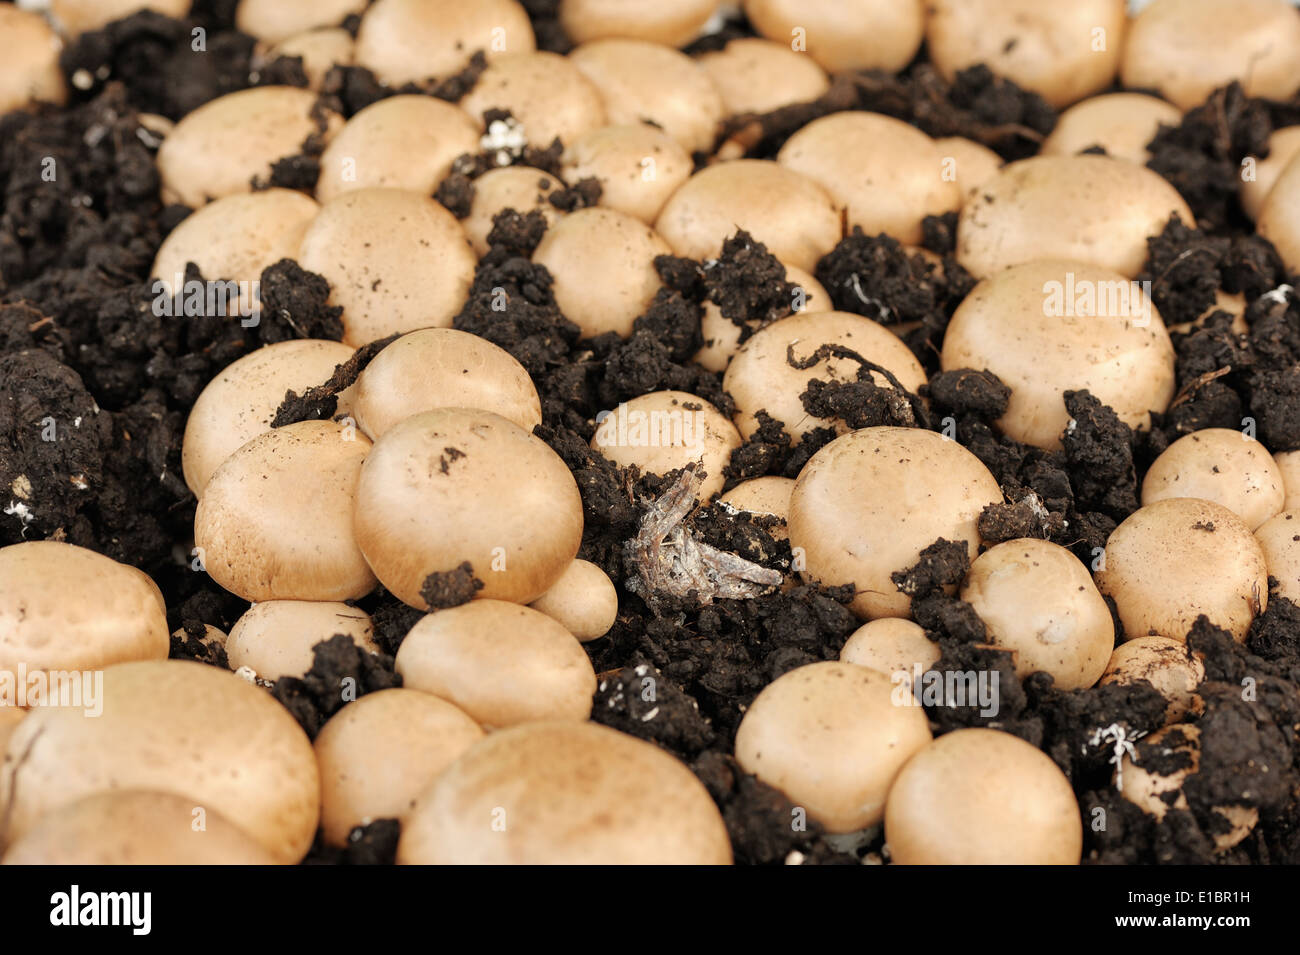 fruiting bodies of champignon, edible gilled fungus. Stock Photo